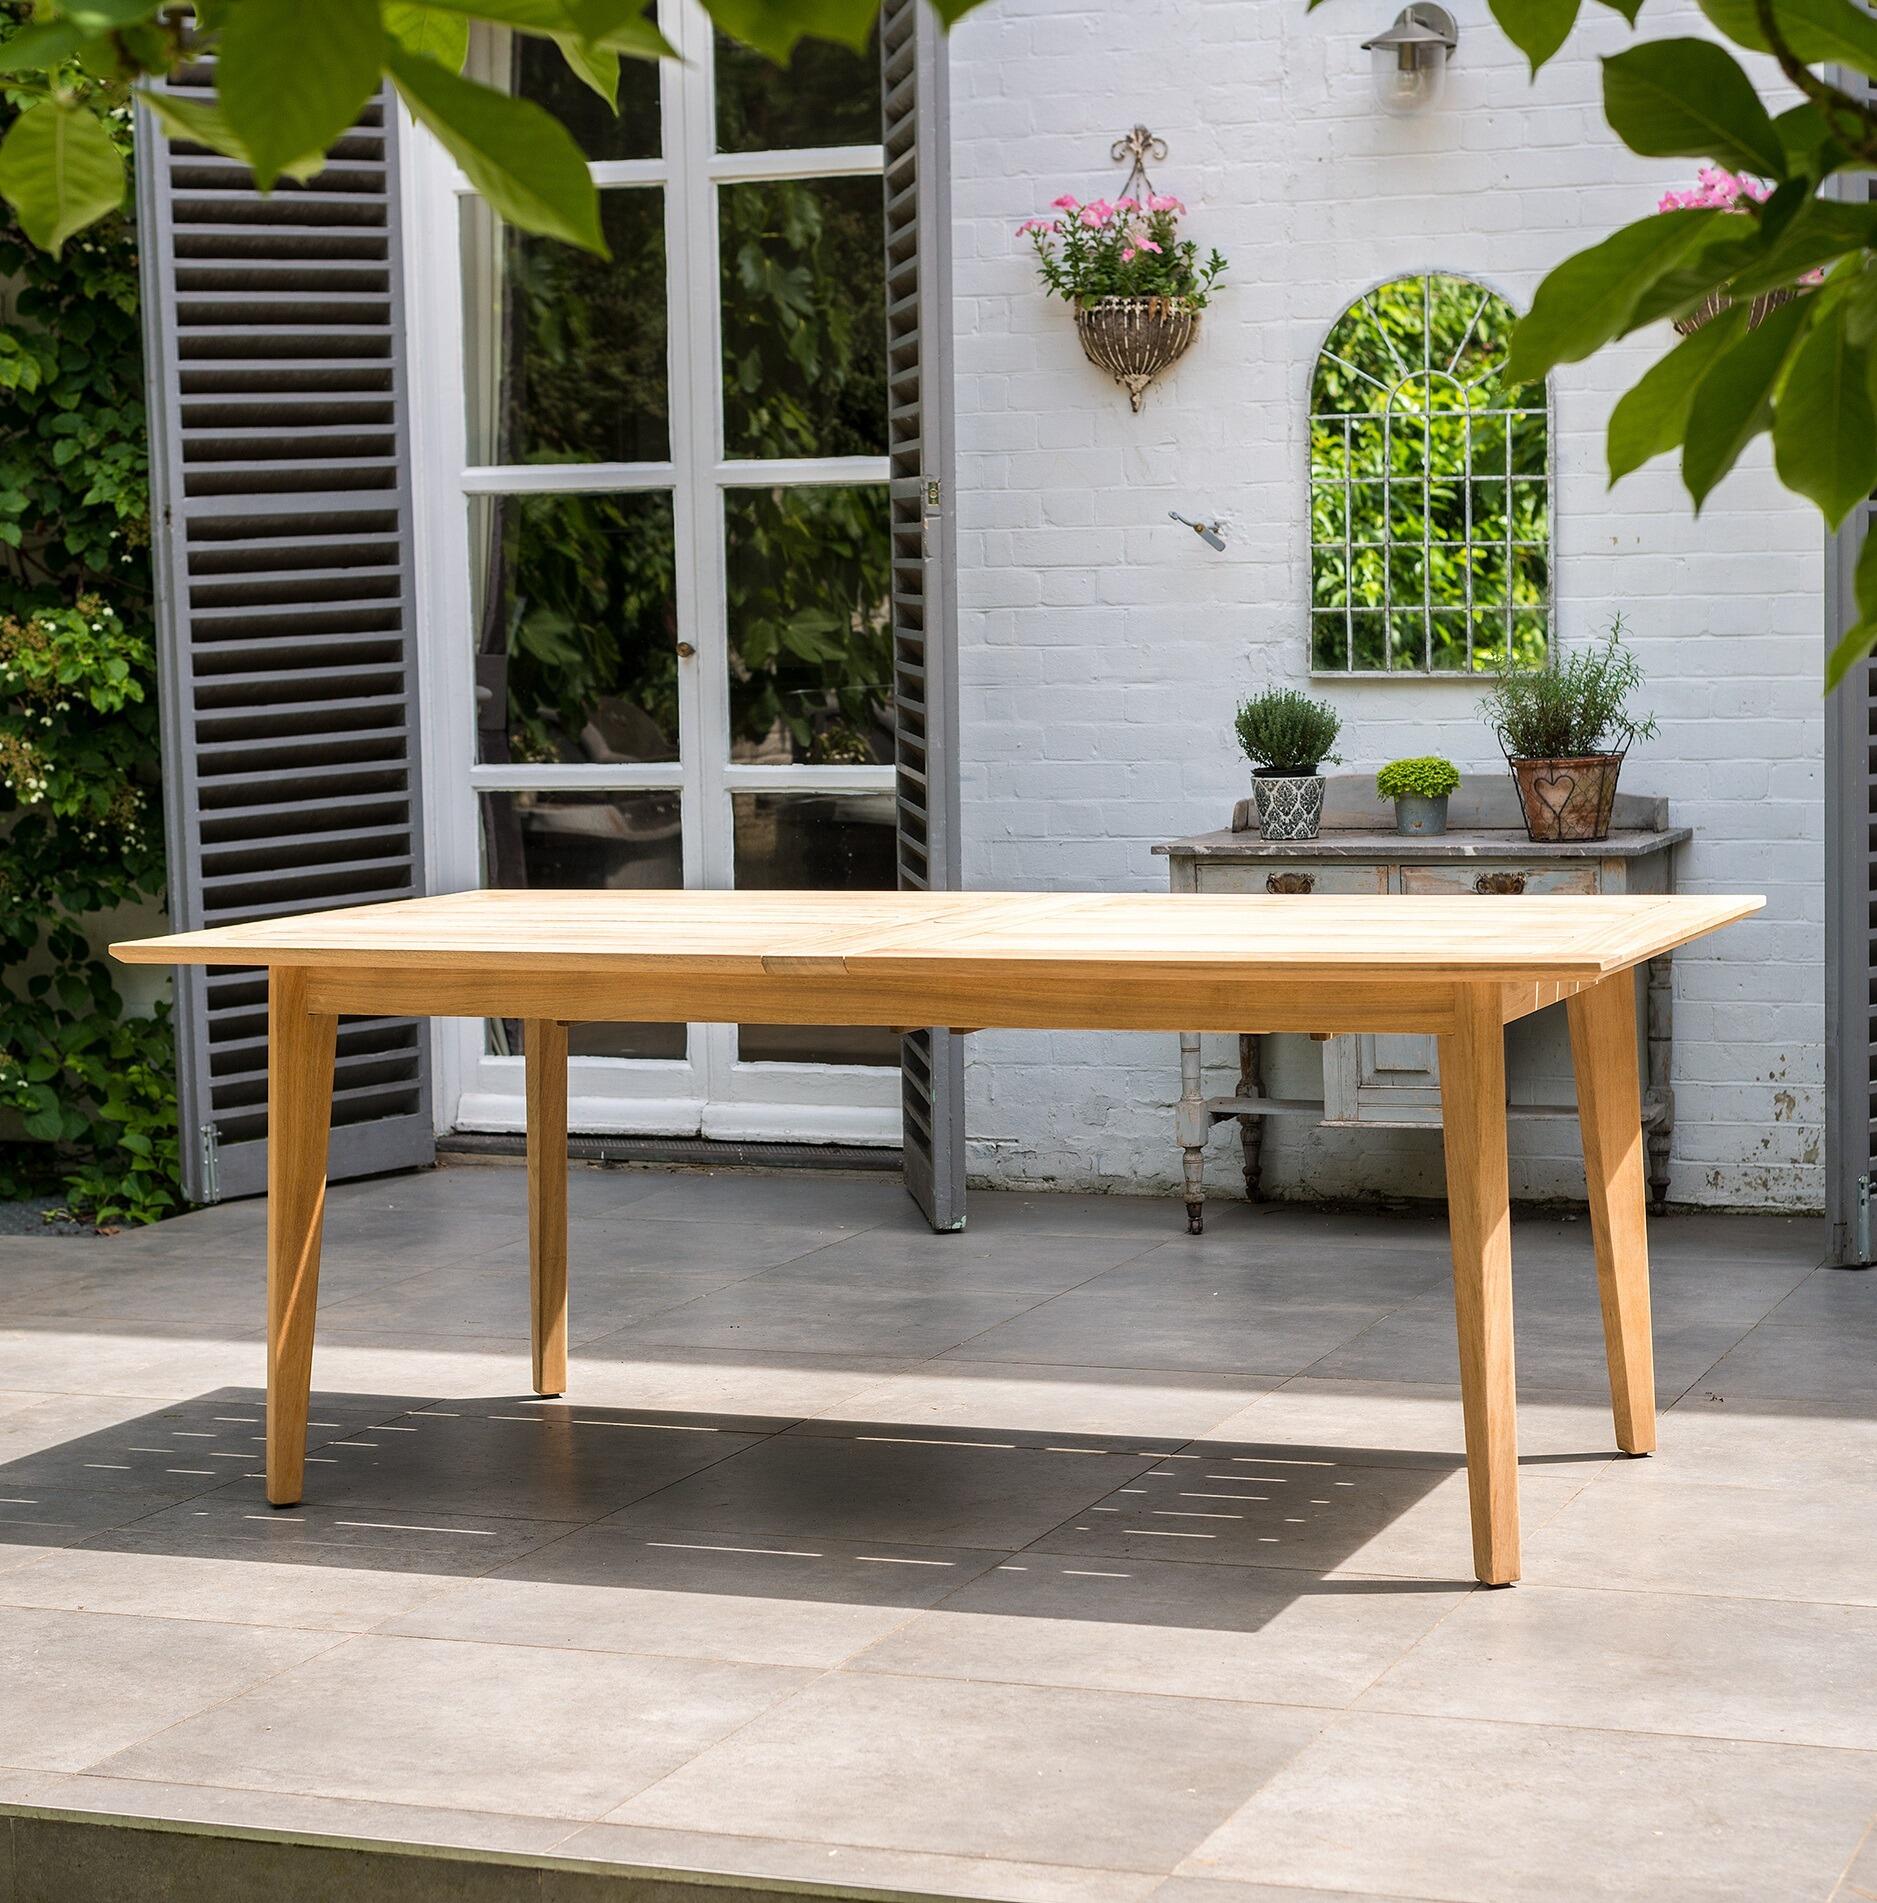 roble hardwood extending garden dining table closed 2 metre length modern outdoor eating